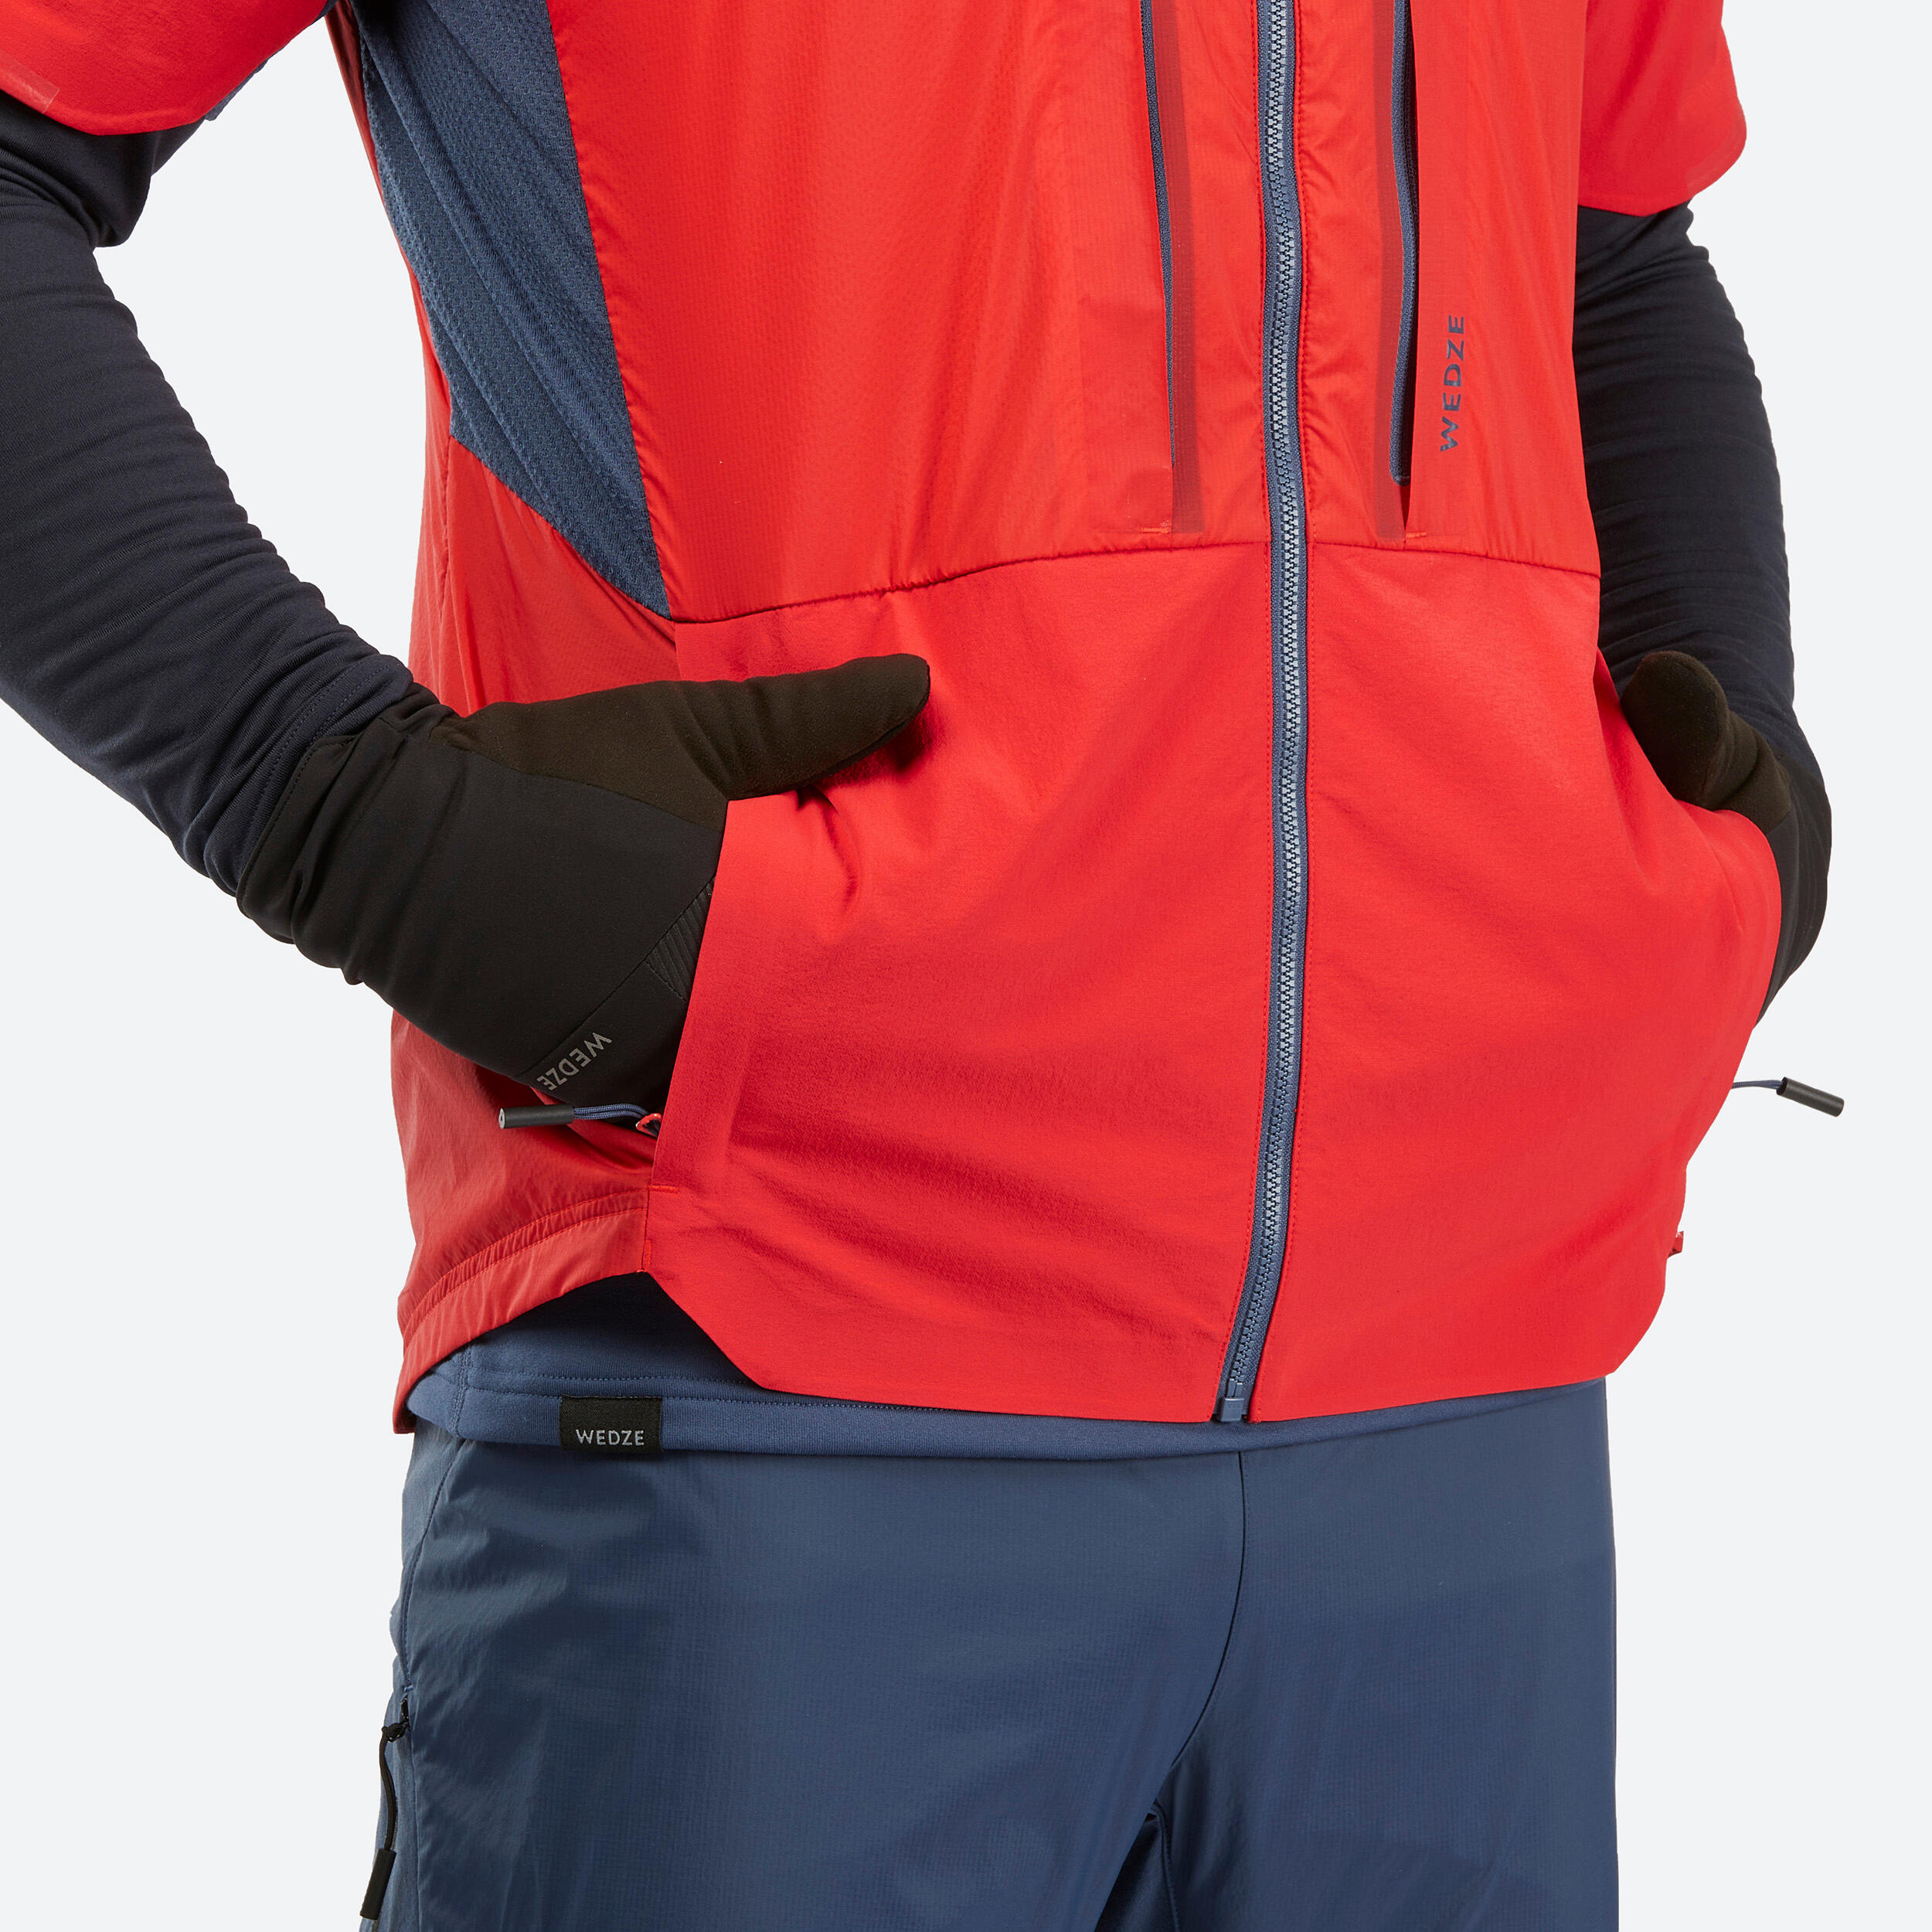 MEN'S PACER SHORT-SLEEVED CROSS COUNTRY SKI JACKET - RED AND NAVY BLUE 11/14